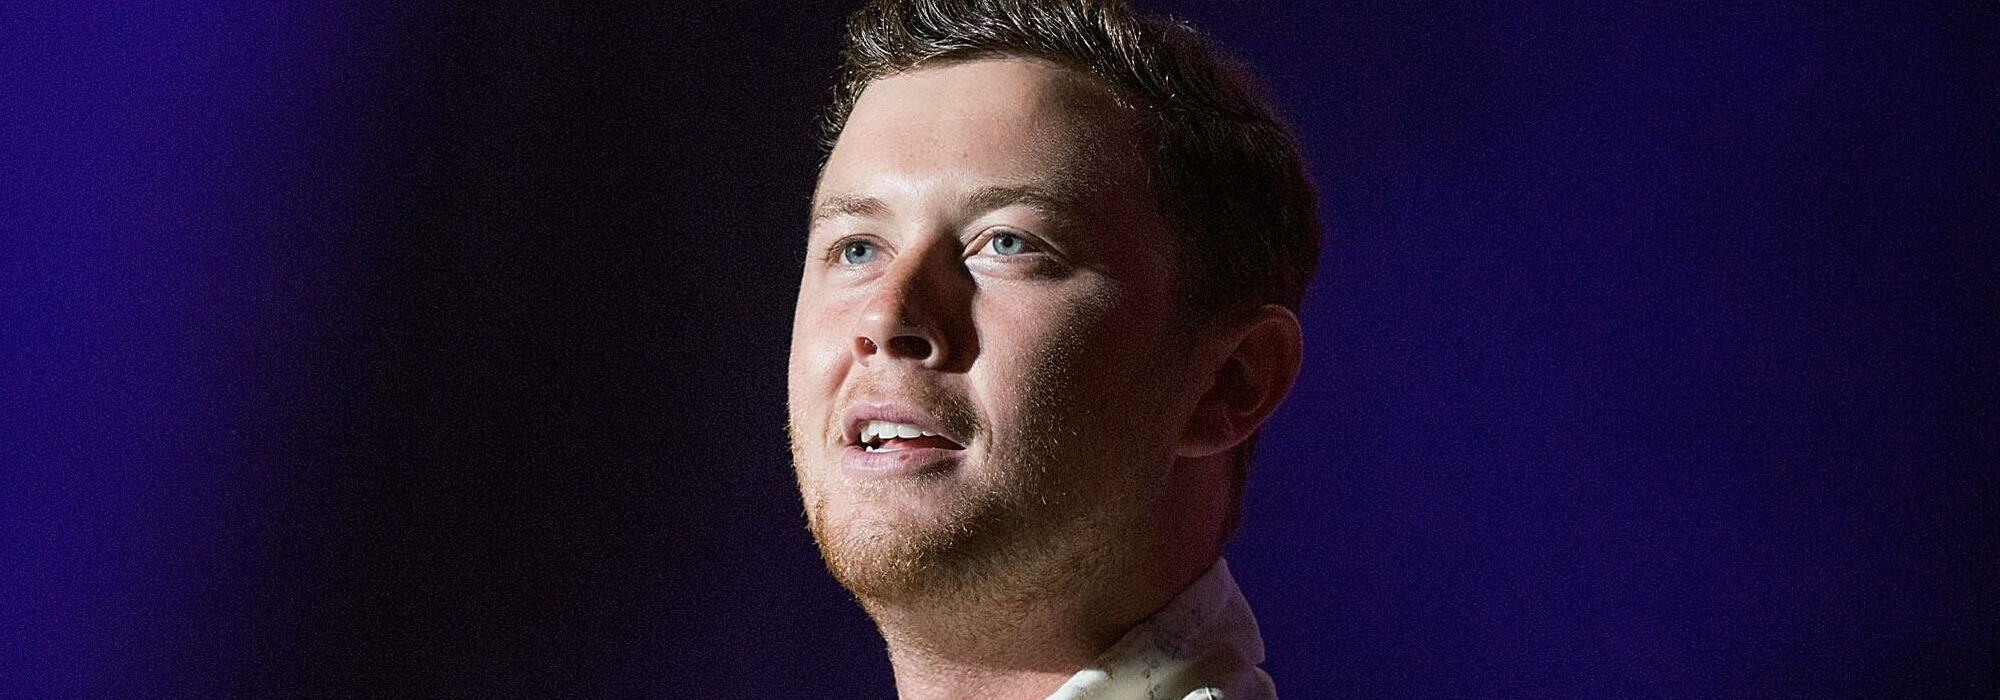 A Scotty McCreery live event